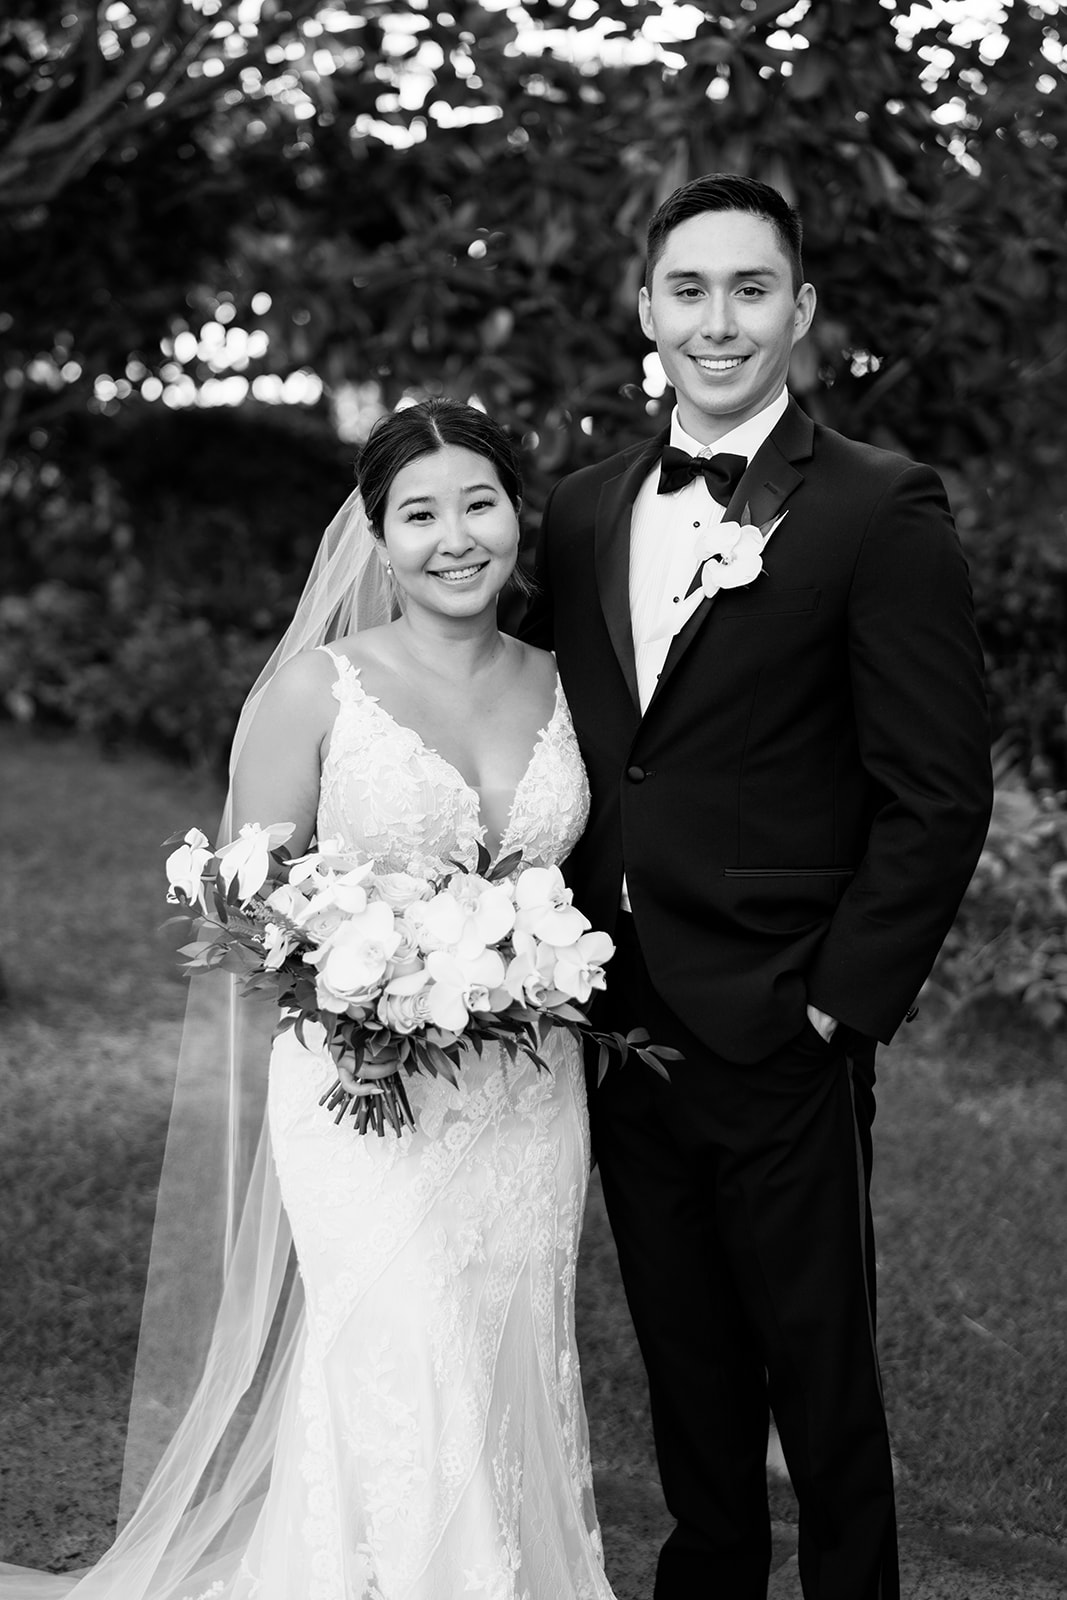 A monochrome photo of the newlyweds taken by Megan Moura Hawaii Photographer.